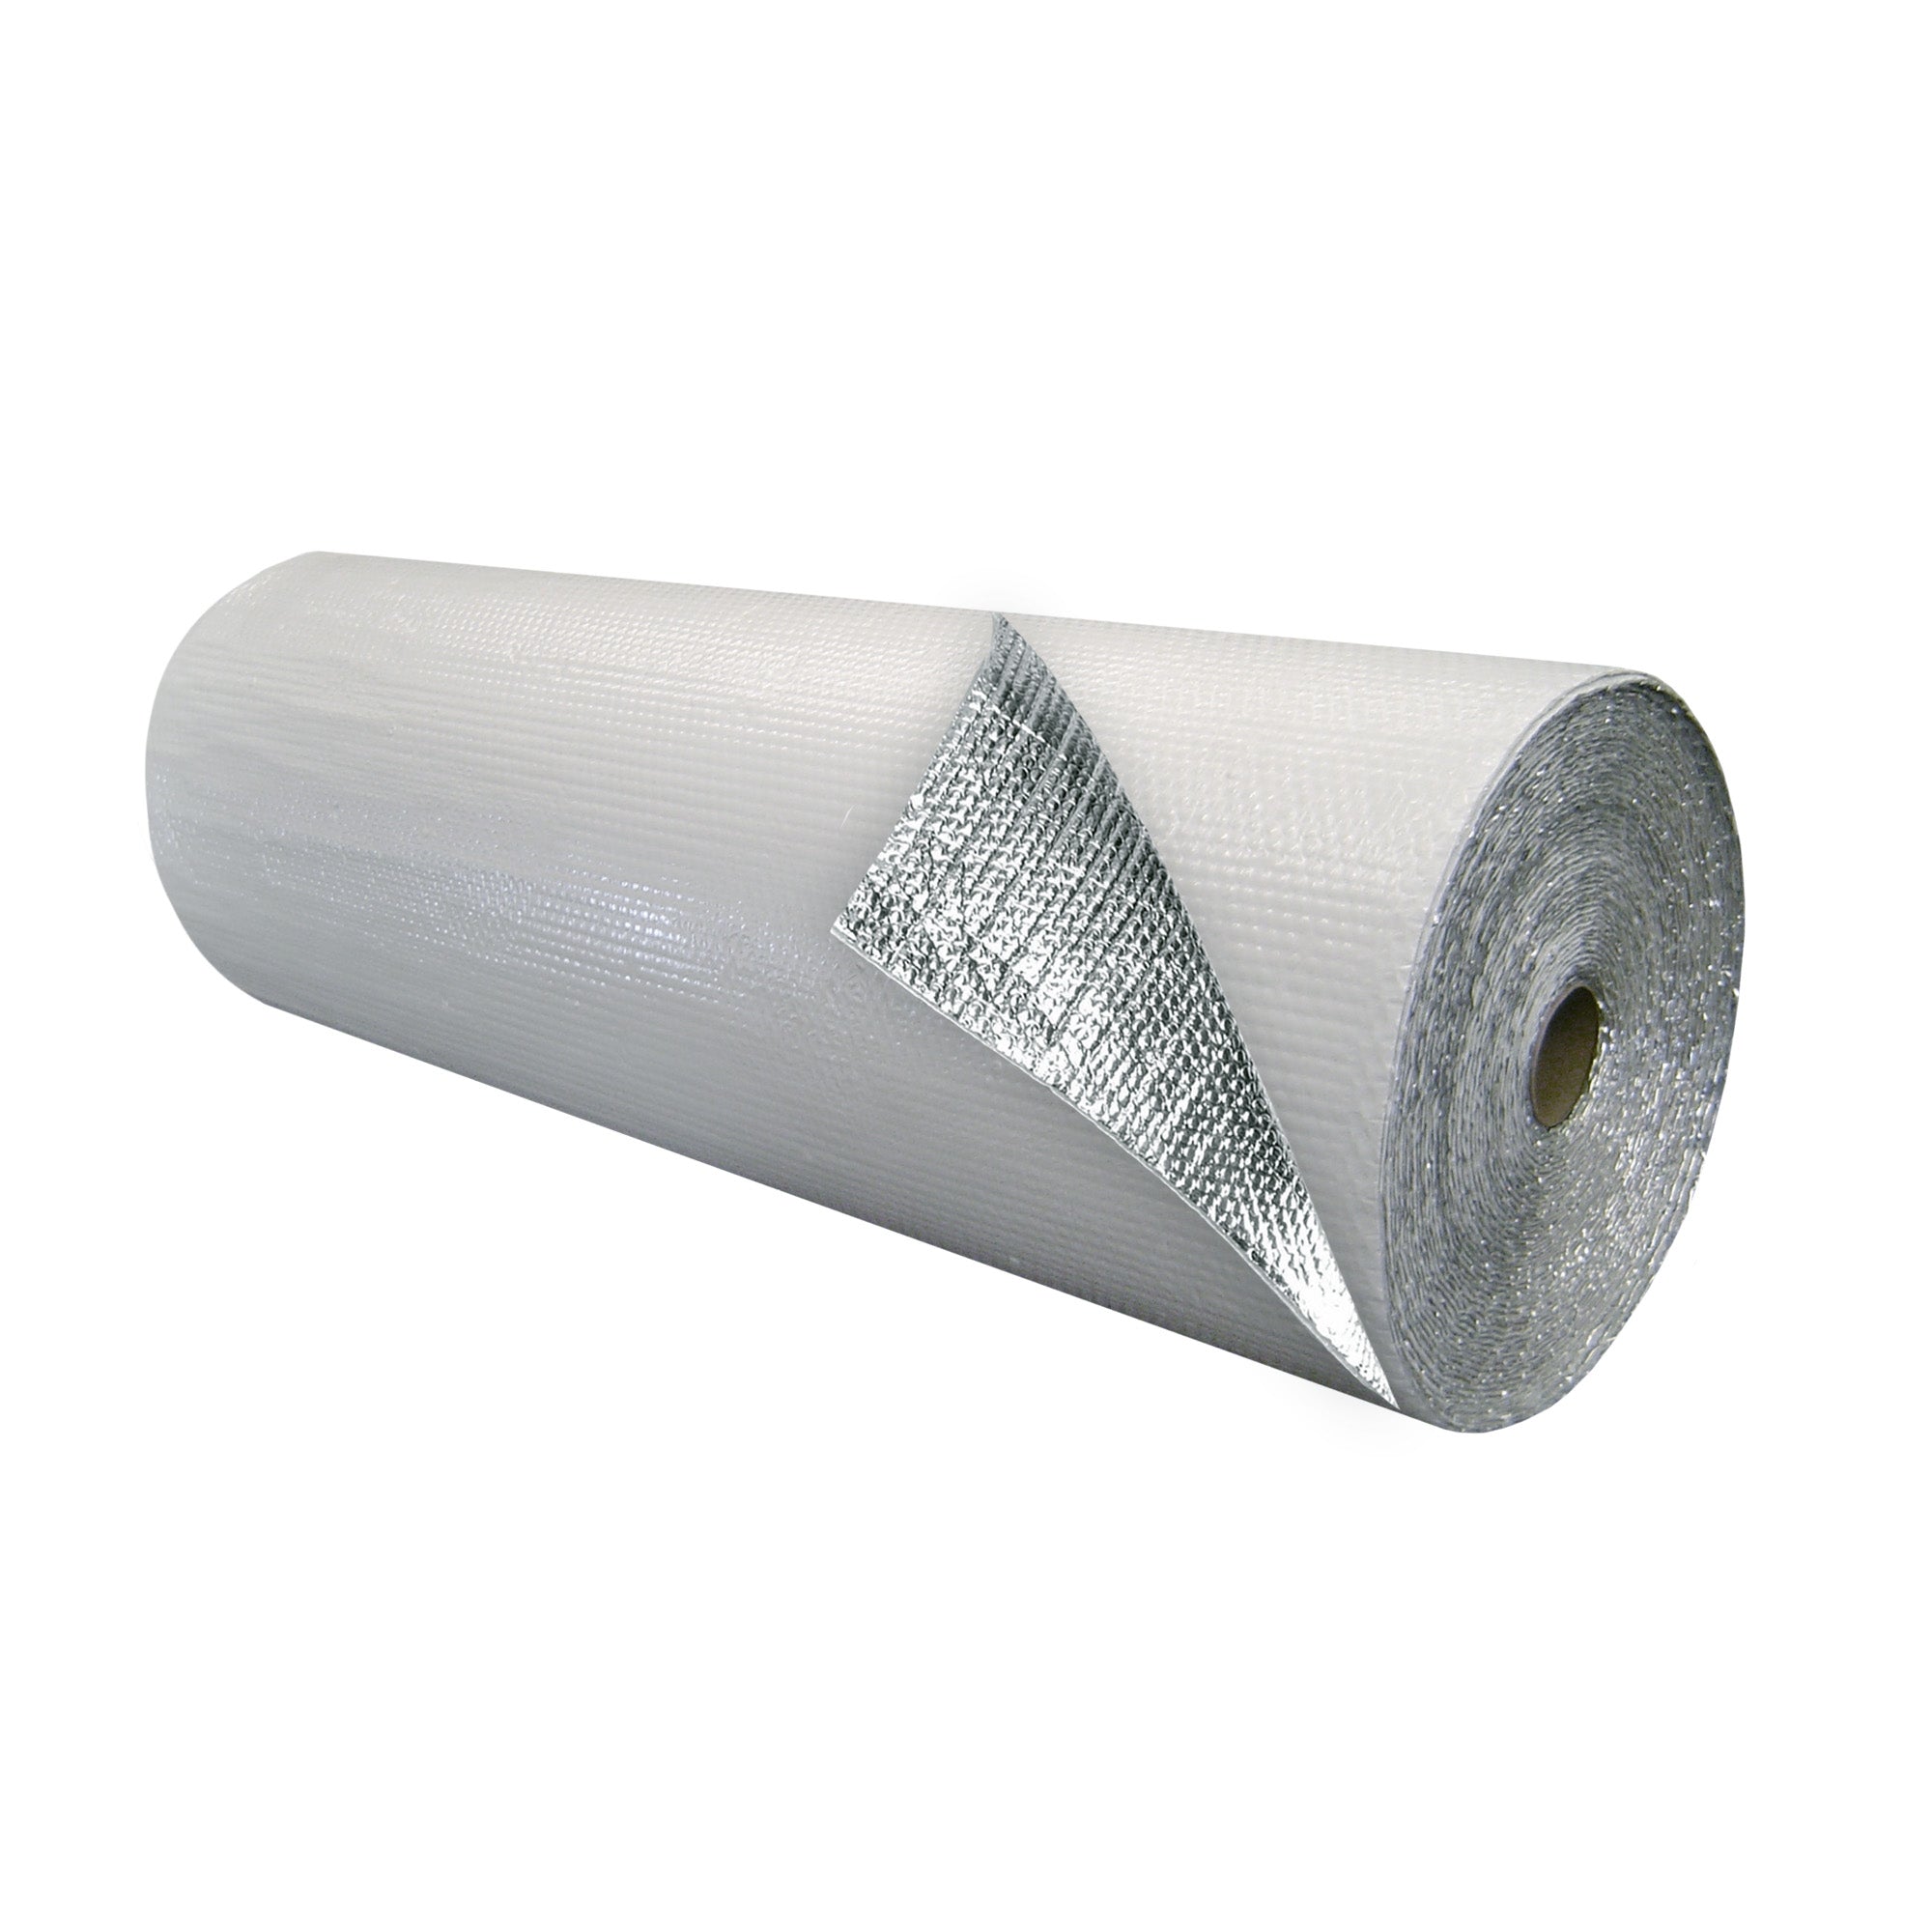 Shipping Foam Rolls, 3/32 Thick, 12 x 750', Perforated